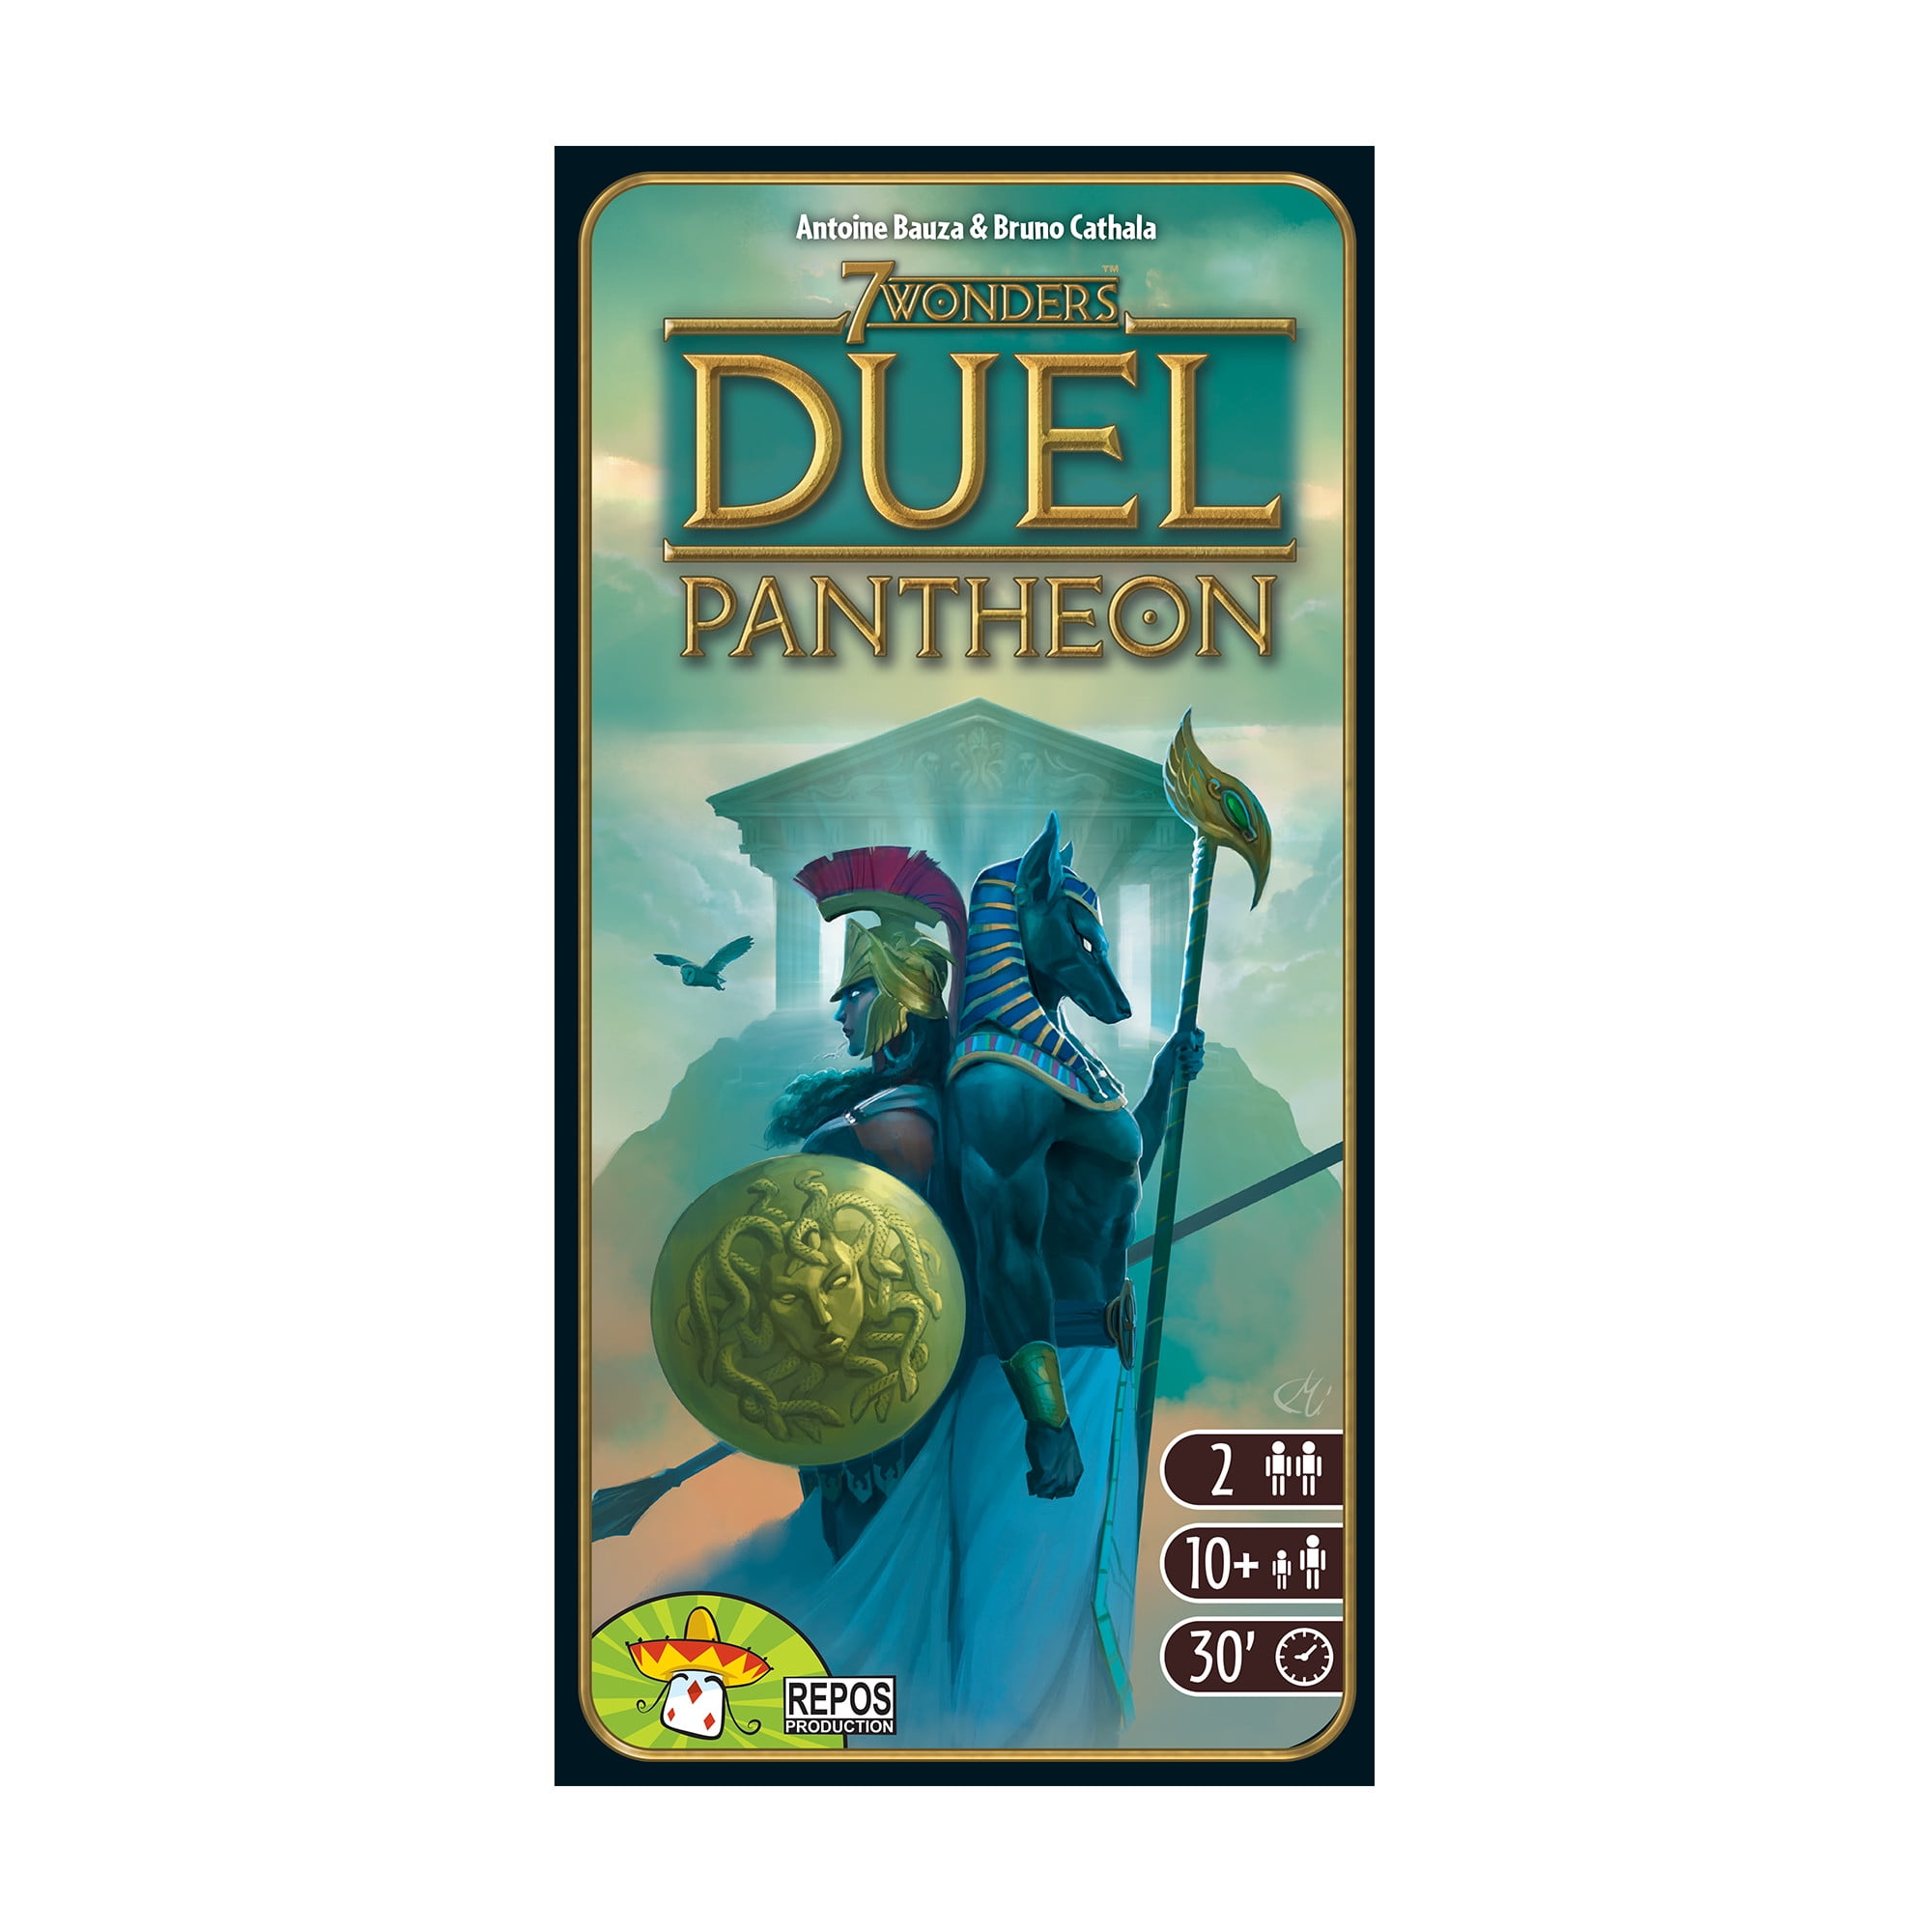 Questions and Answers: Comparing 7 Wonders Duel with 7 Wonders